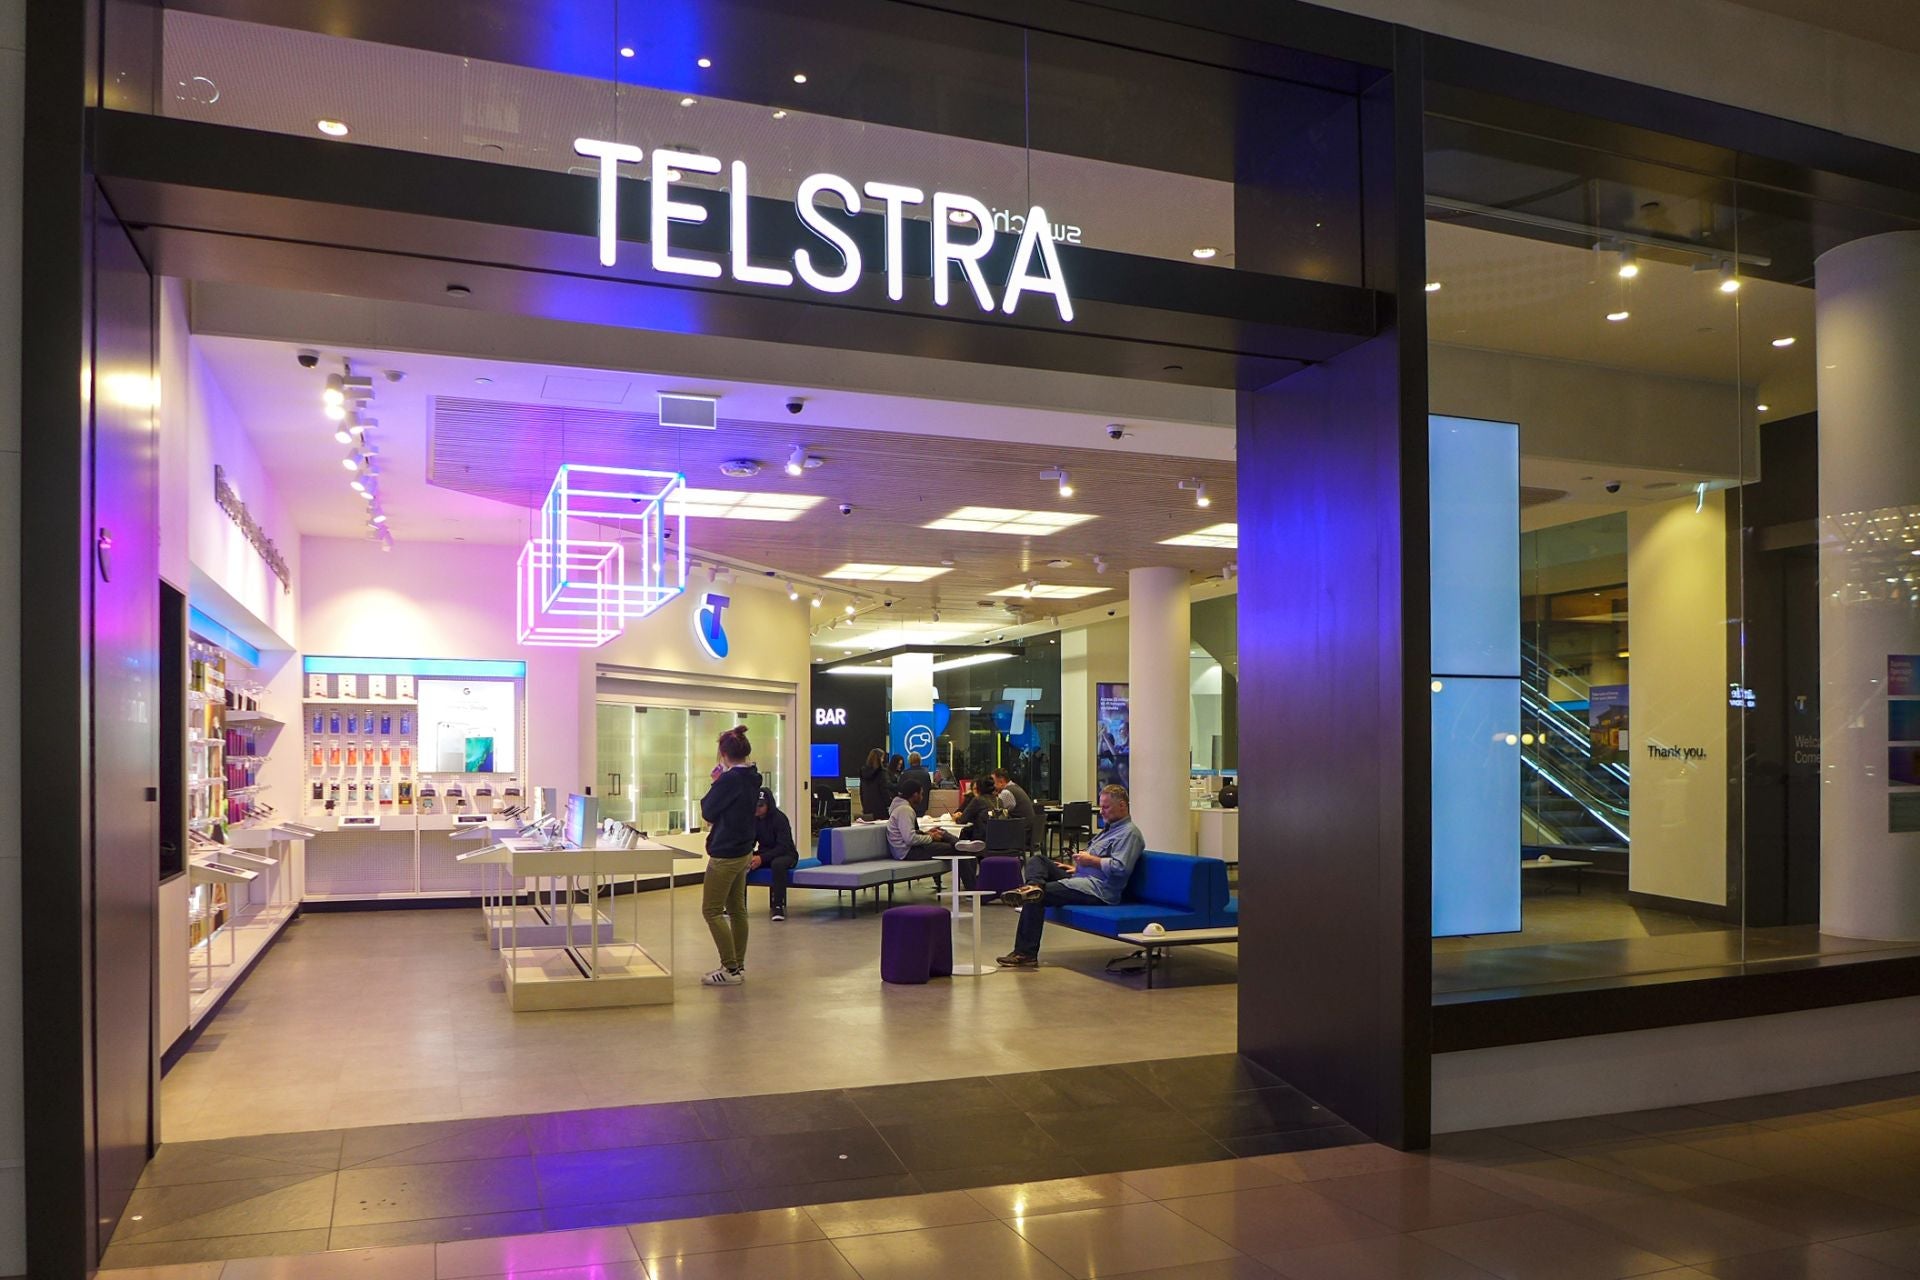 Telstra aims to make all its packaging fully recyclable